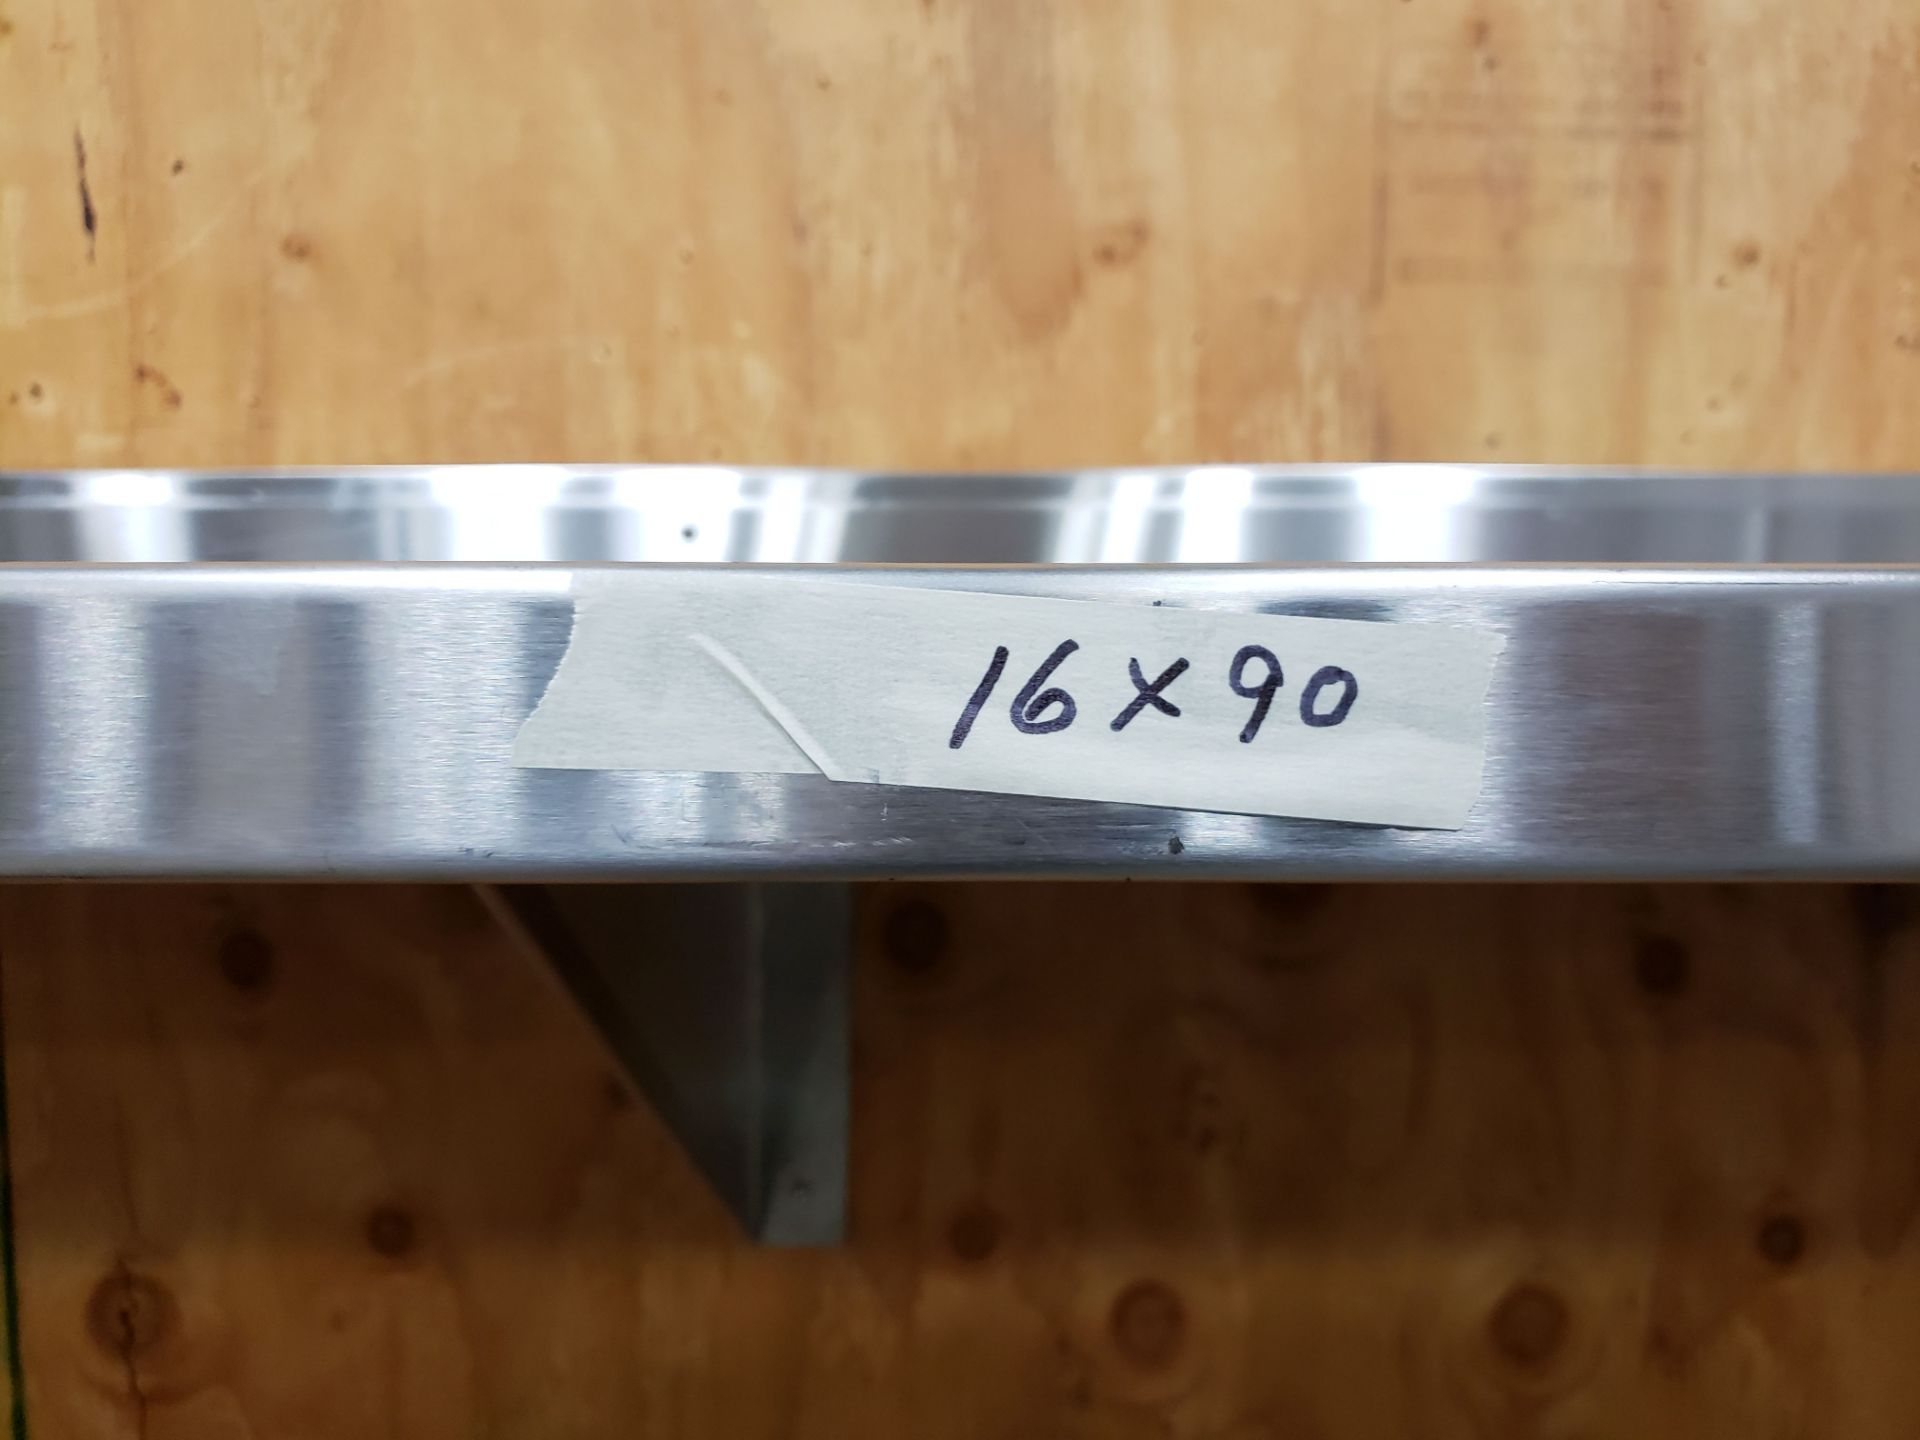 16" x 90" Stainless Steel Wall Shelf - Image 3 of 3